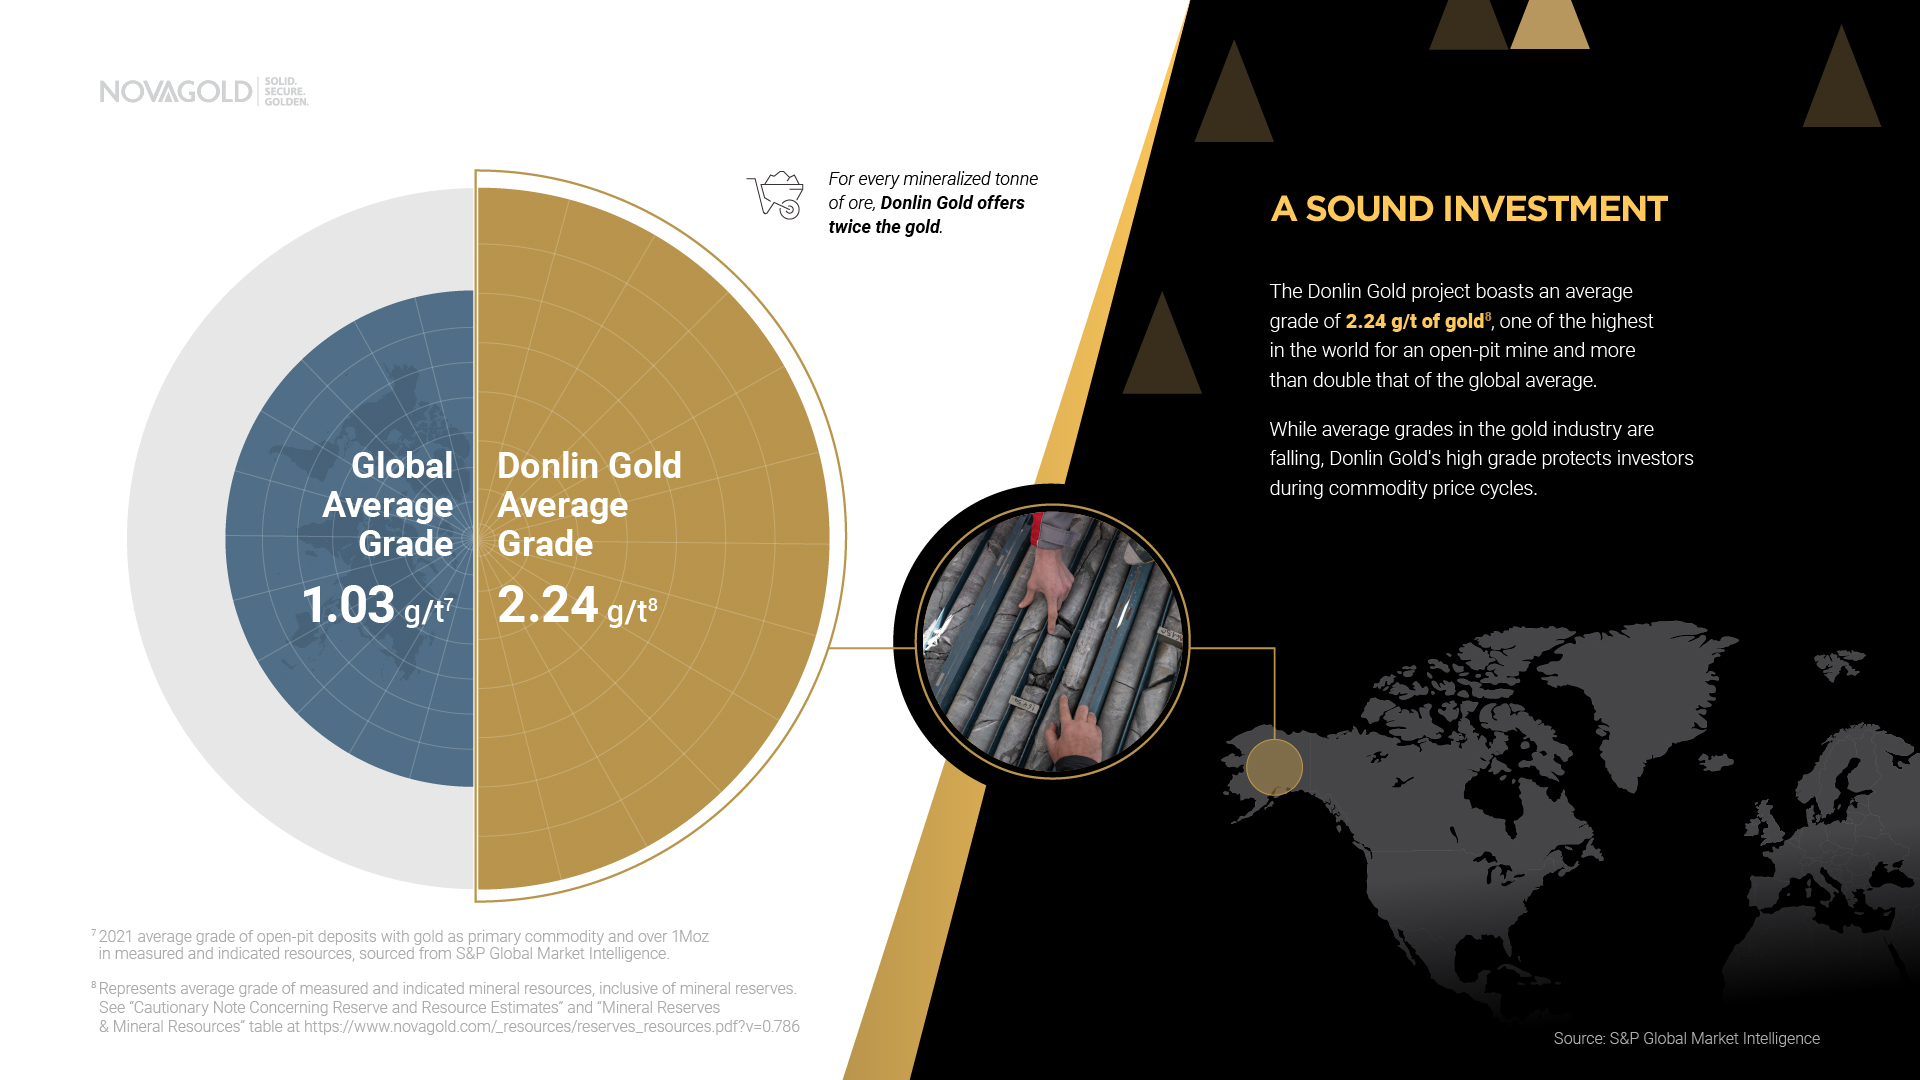 Donlin Gold project boasts an average grade of .23 g/t of gold, one of the highest in the world for open-pit mining and double the global average.